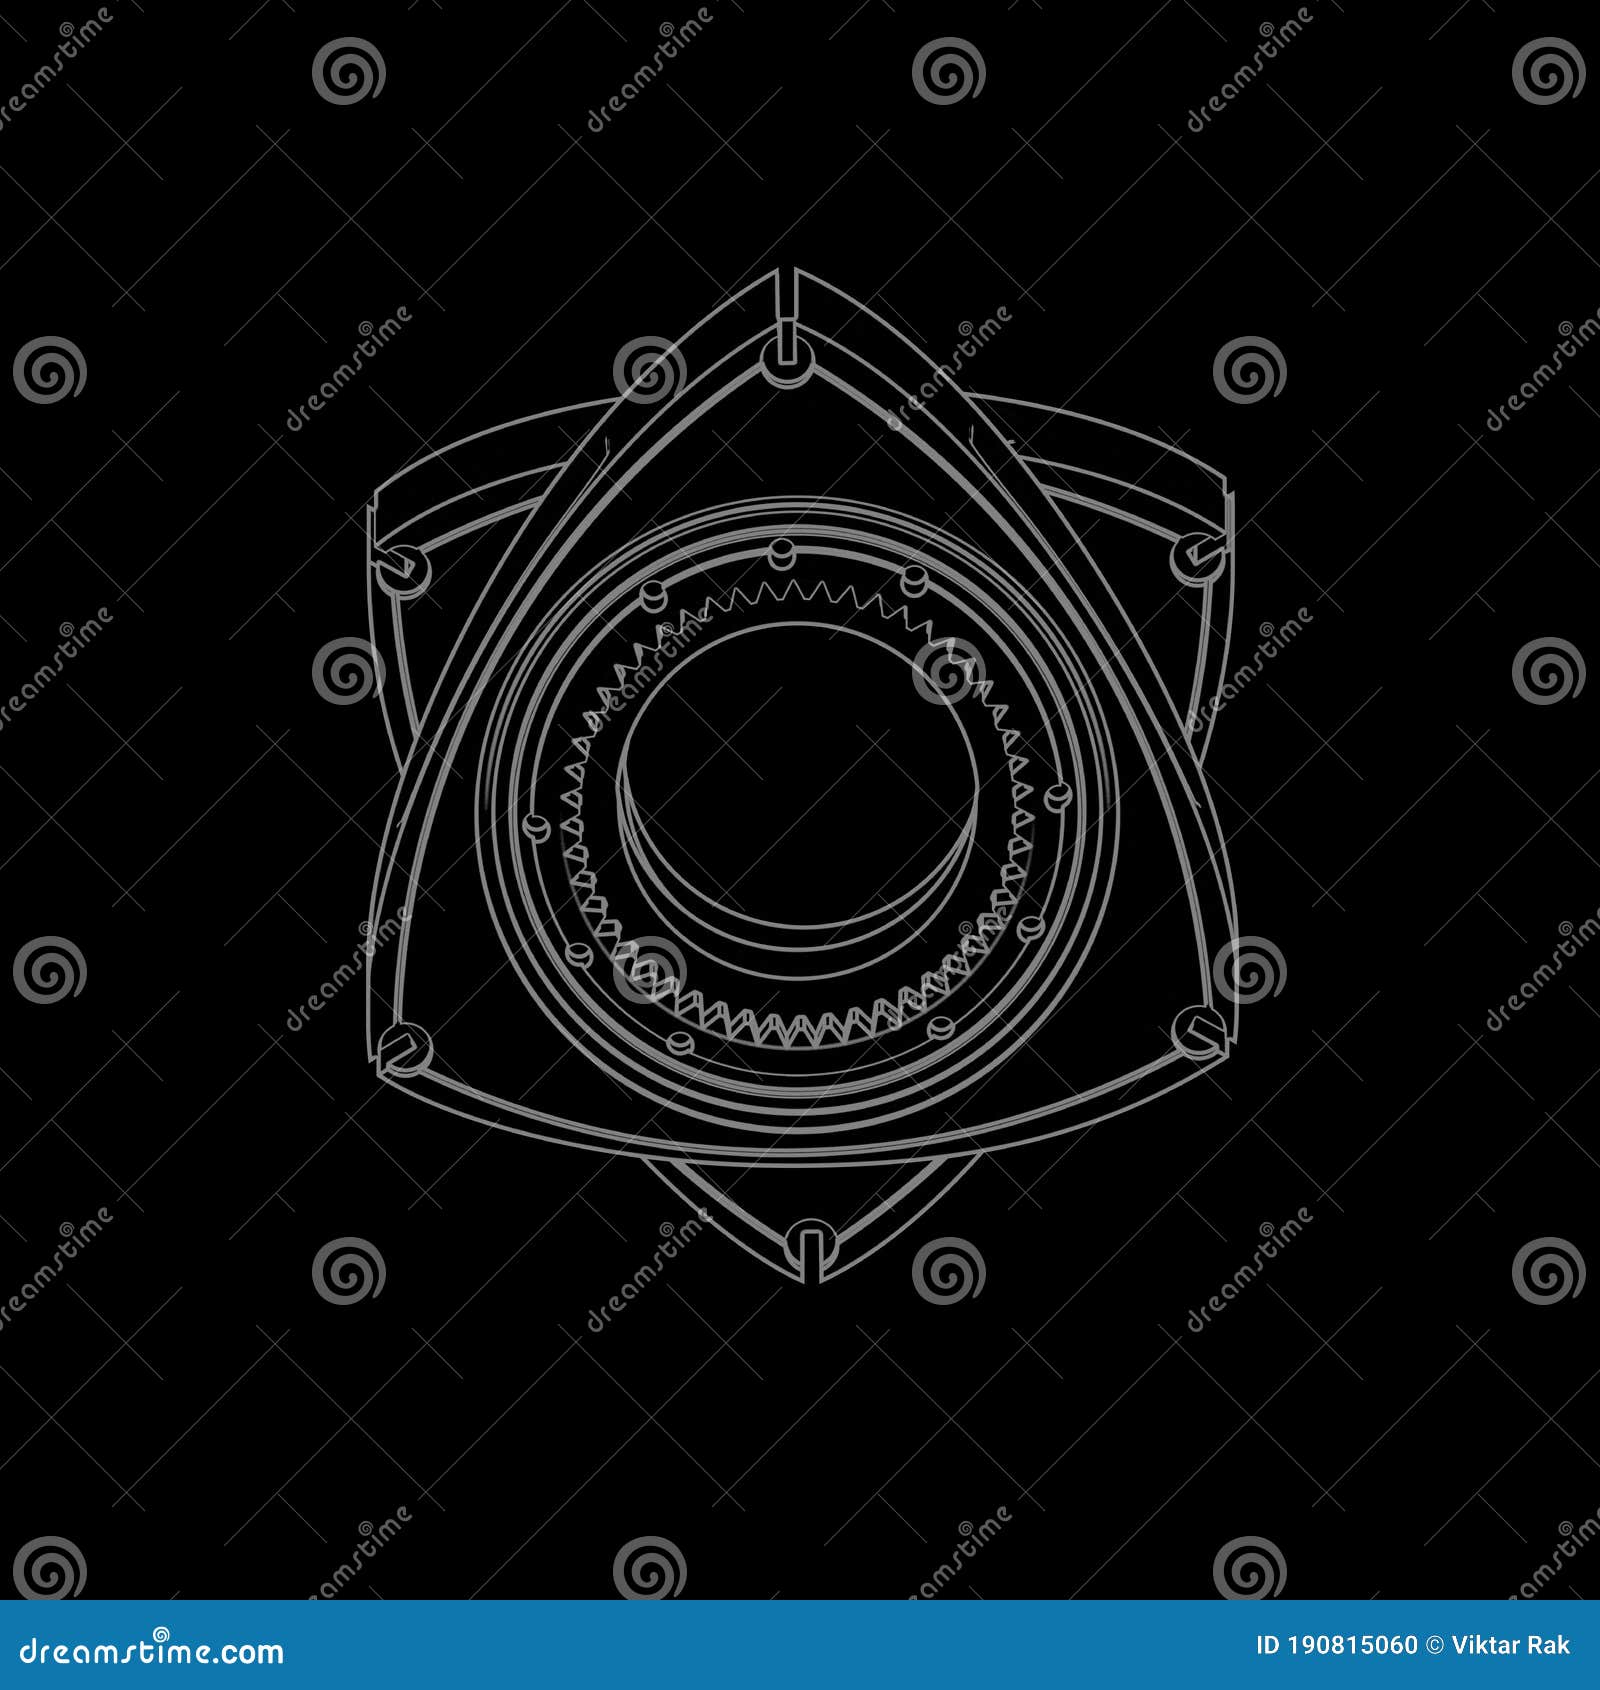 star from the rotary wankel engine rotors. black automobile background.